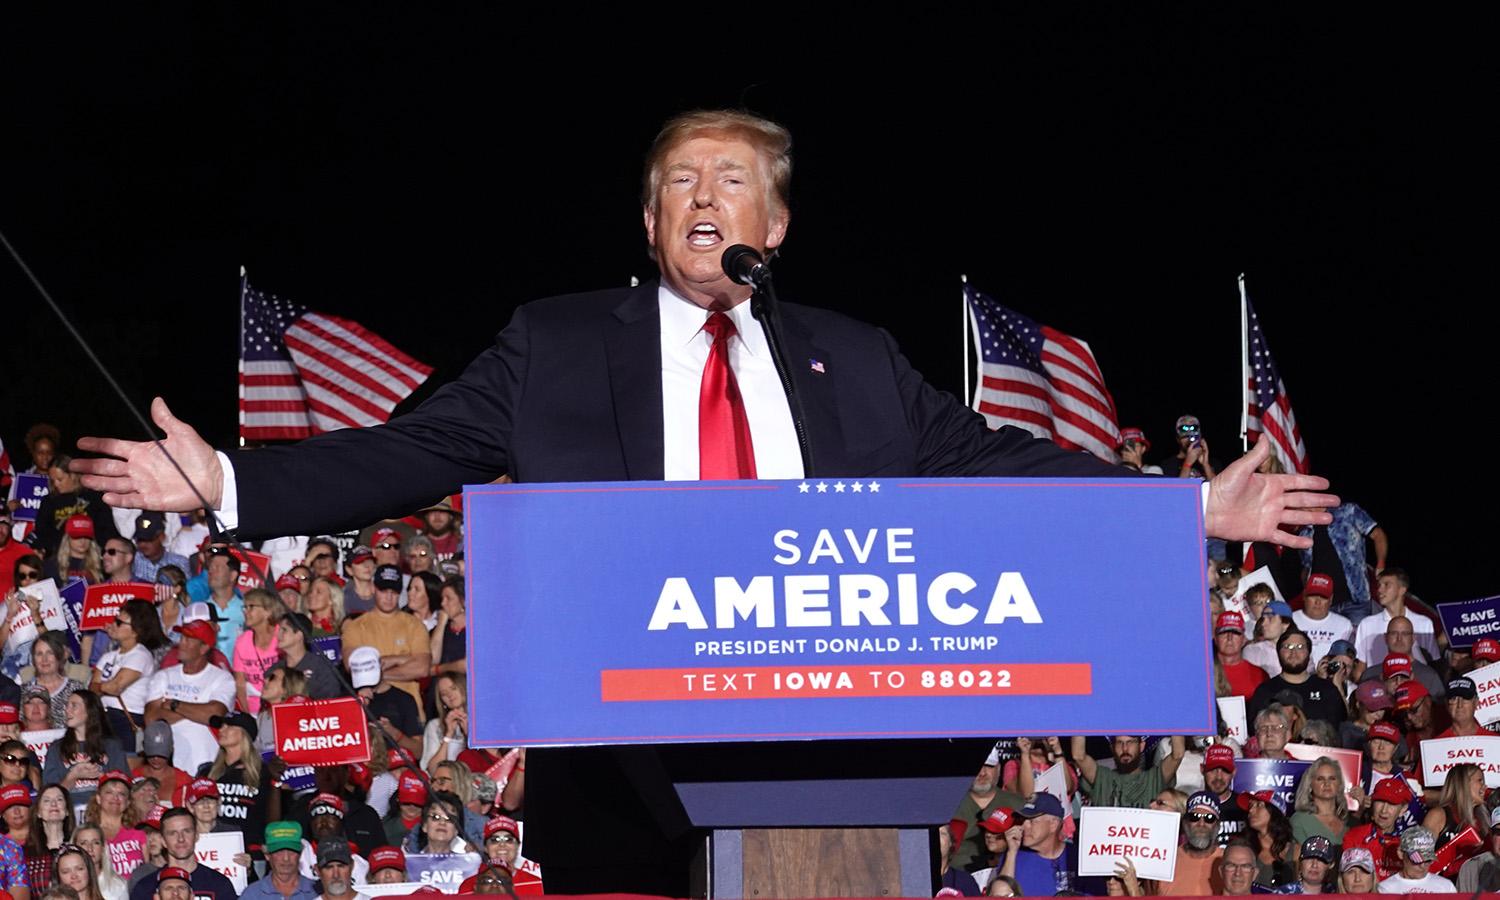 Former President Donald Trump speaks to supporters during a rally at the Iowa State Fairgrounds on Oct. 9, 2021, in Des Moines, Iowa. (Photo by Scott Olson/Getty Images)